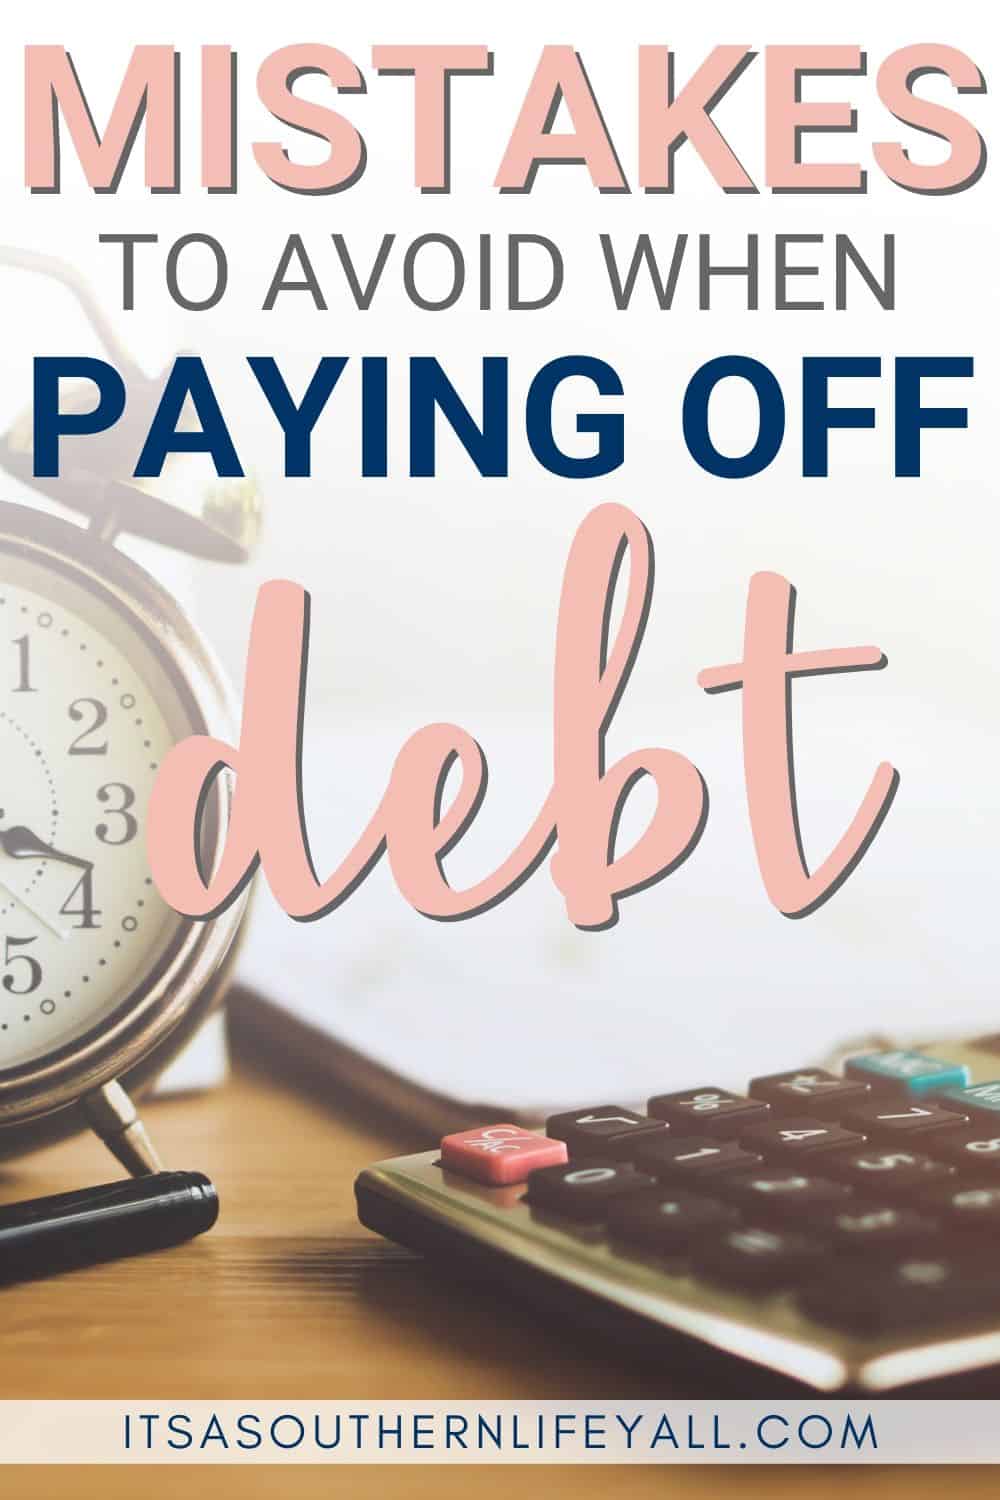 Mistakes to avoid when paying off debt